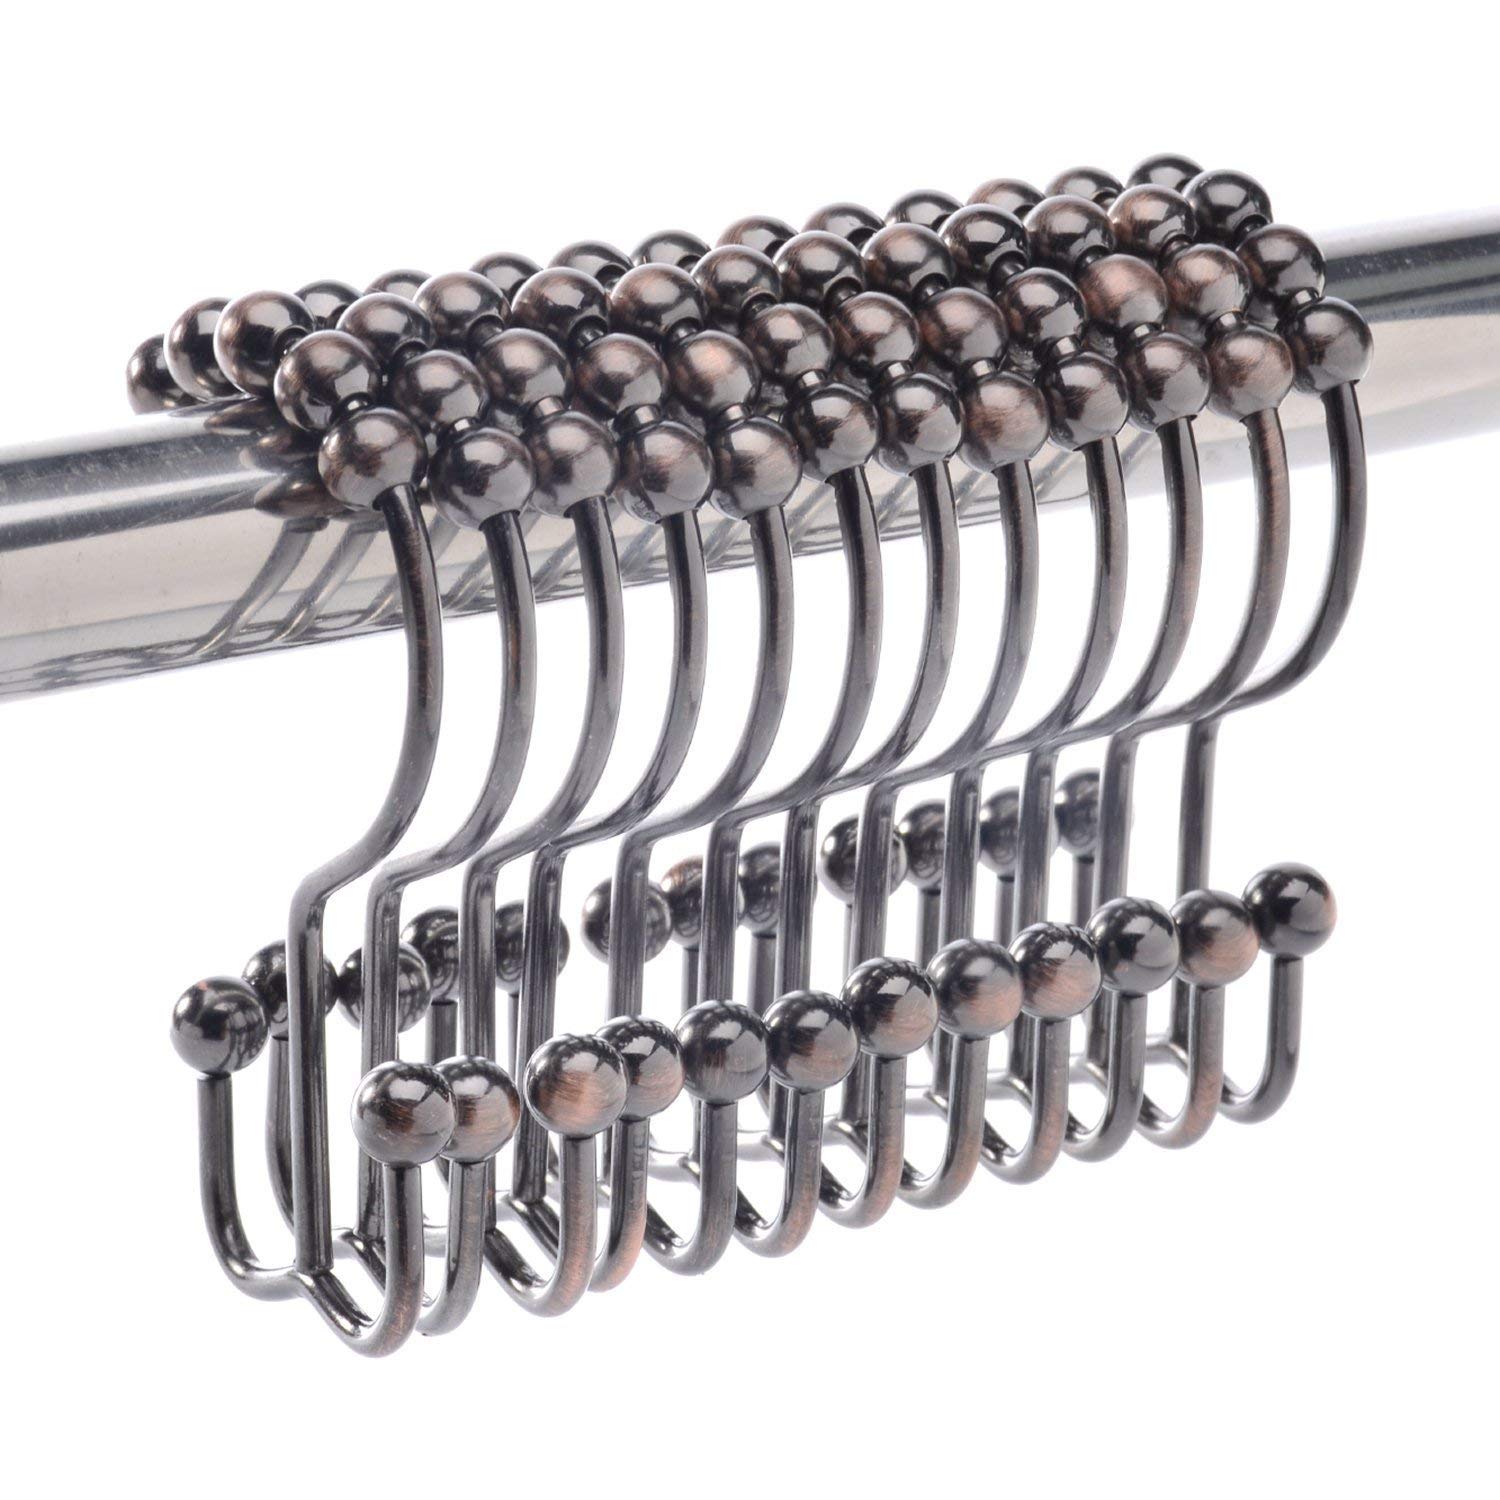 Stainless Steel Ring Hooks – Secure & Durable for 16 mm Rods.